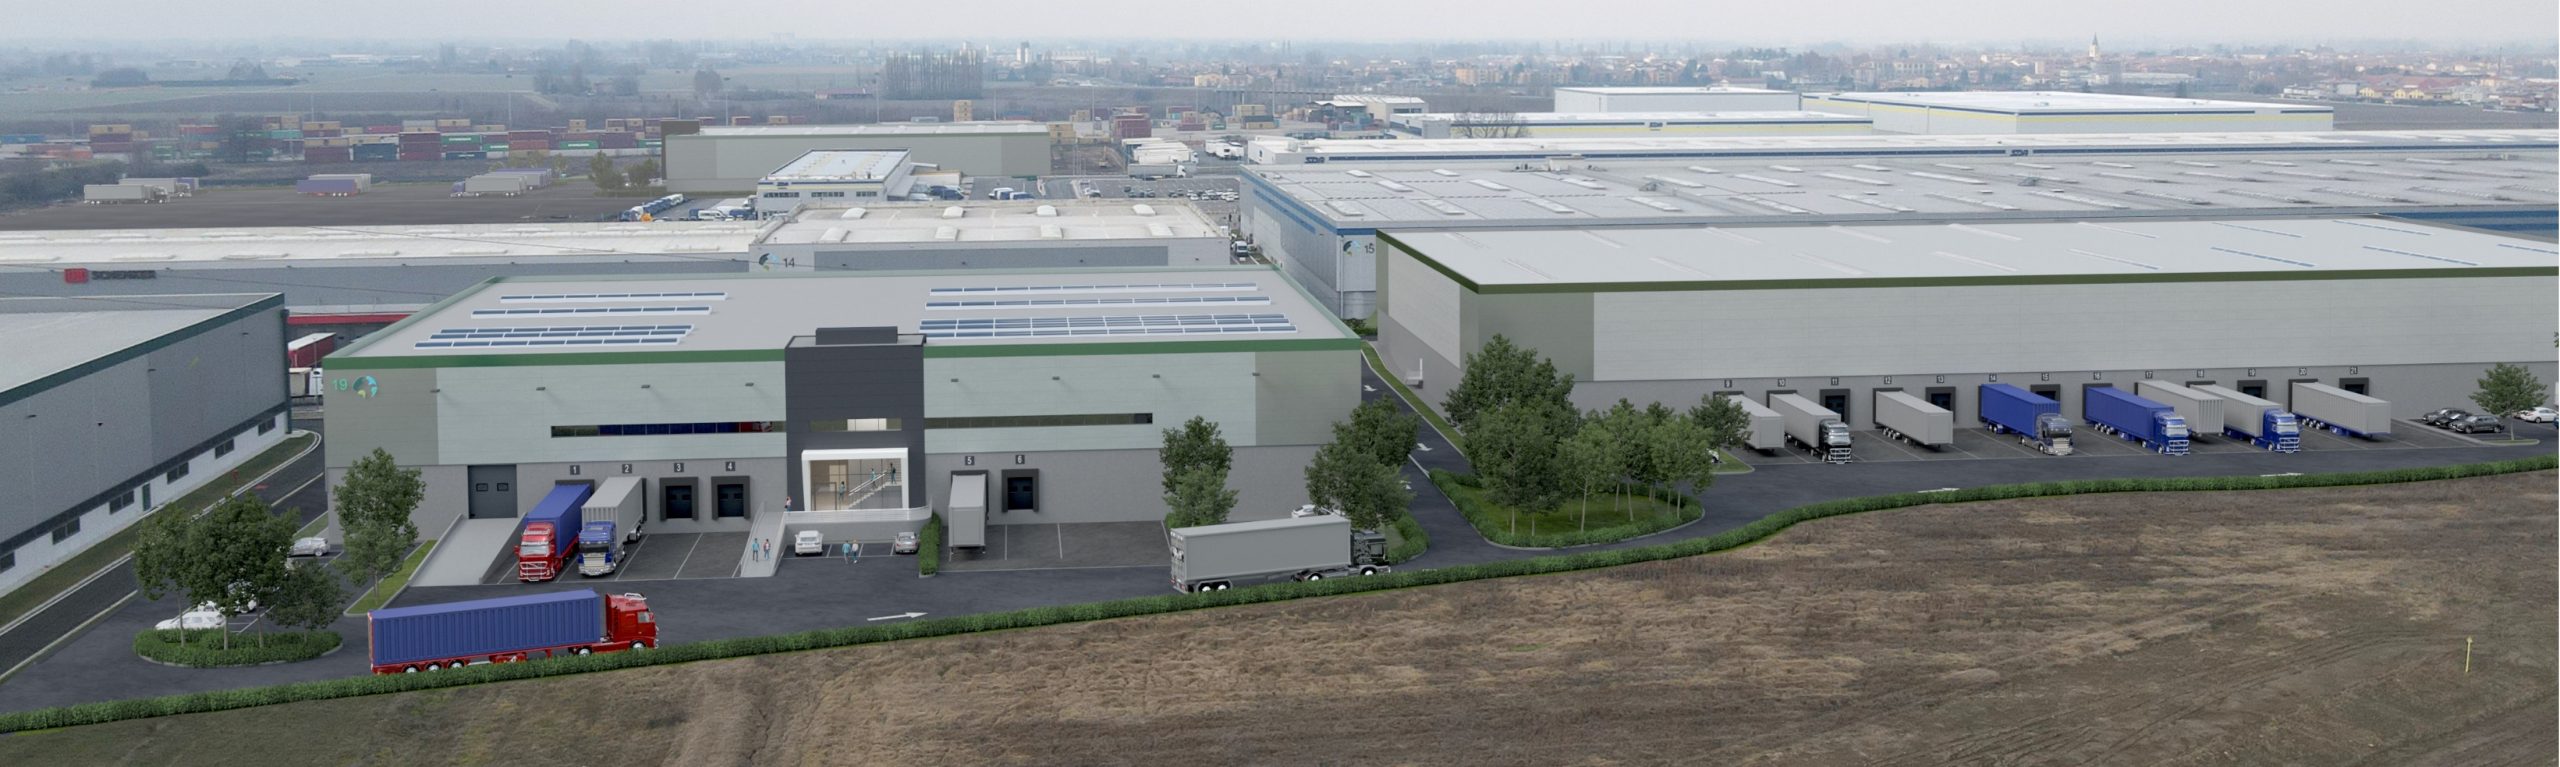 GSE ITALIA SIGNS THE THIRD PROJECT WITH PROLOGIS: WORKS ARE UNDERWAY FOR THE CONSTRUCTION OF THREE NEW LOGISTICS WAREHOUSES AT BOLOGNA FREIGHT VILLAGE